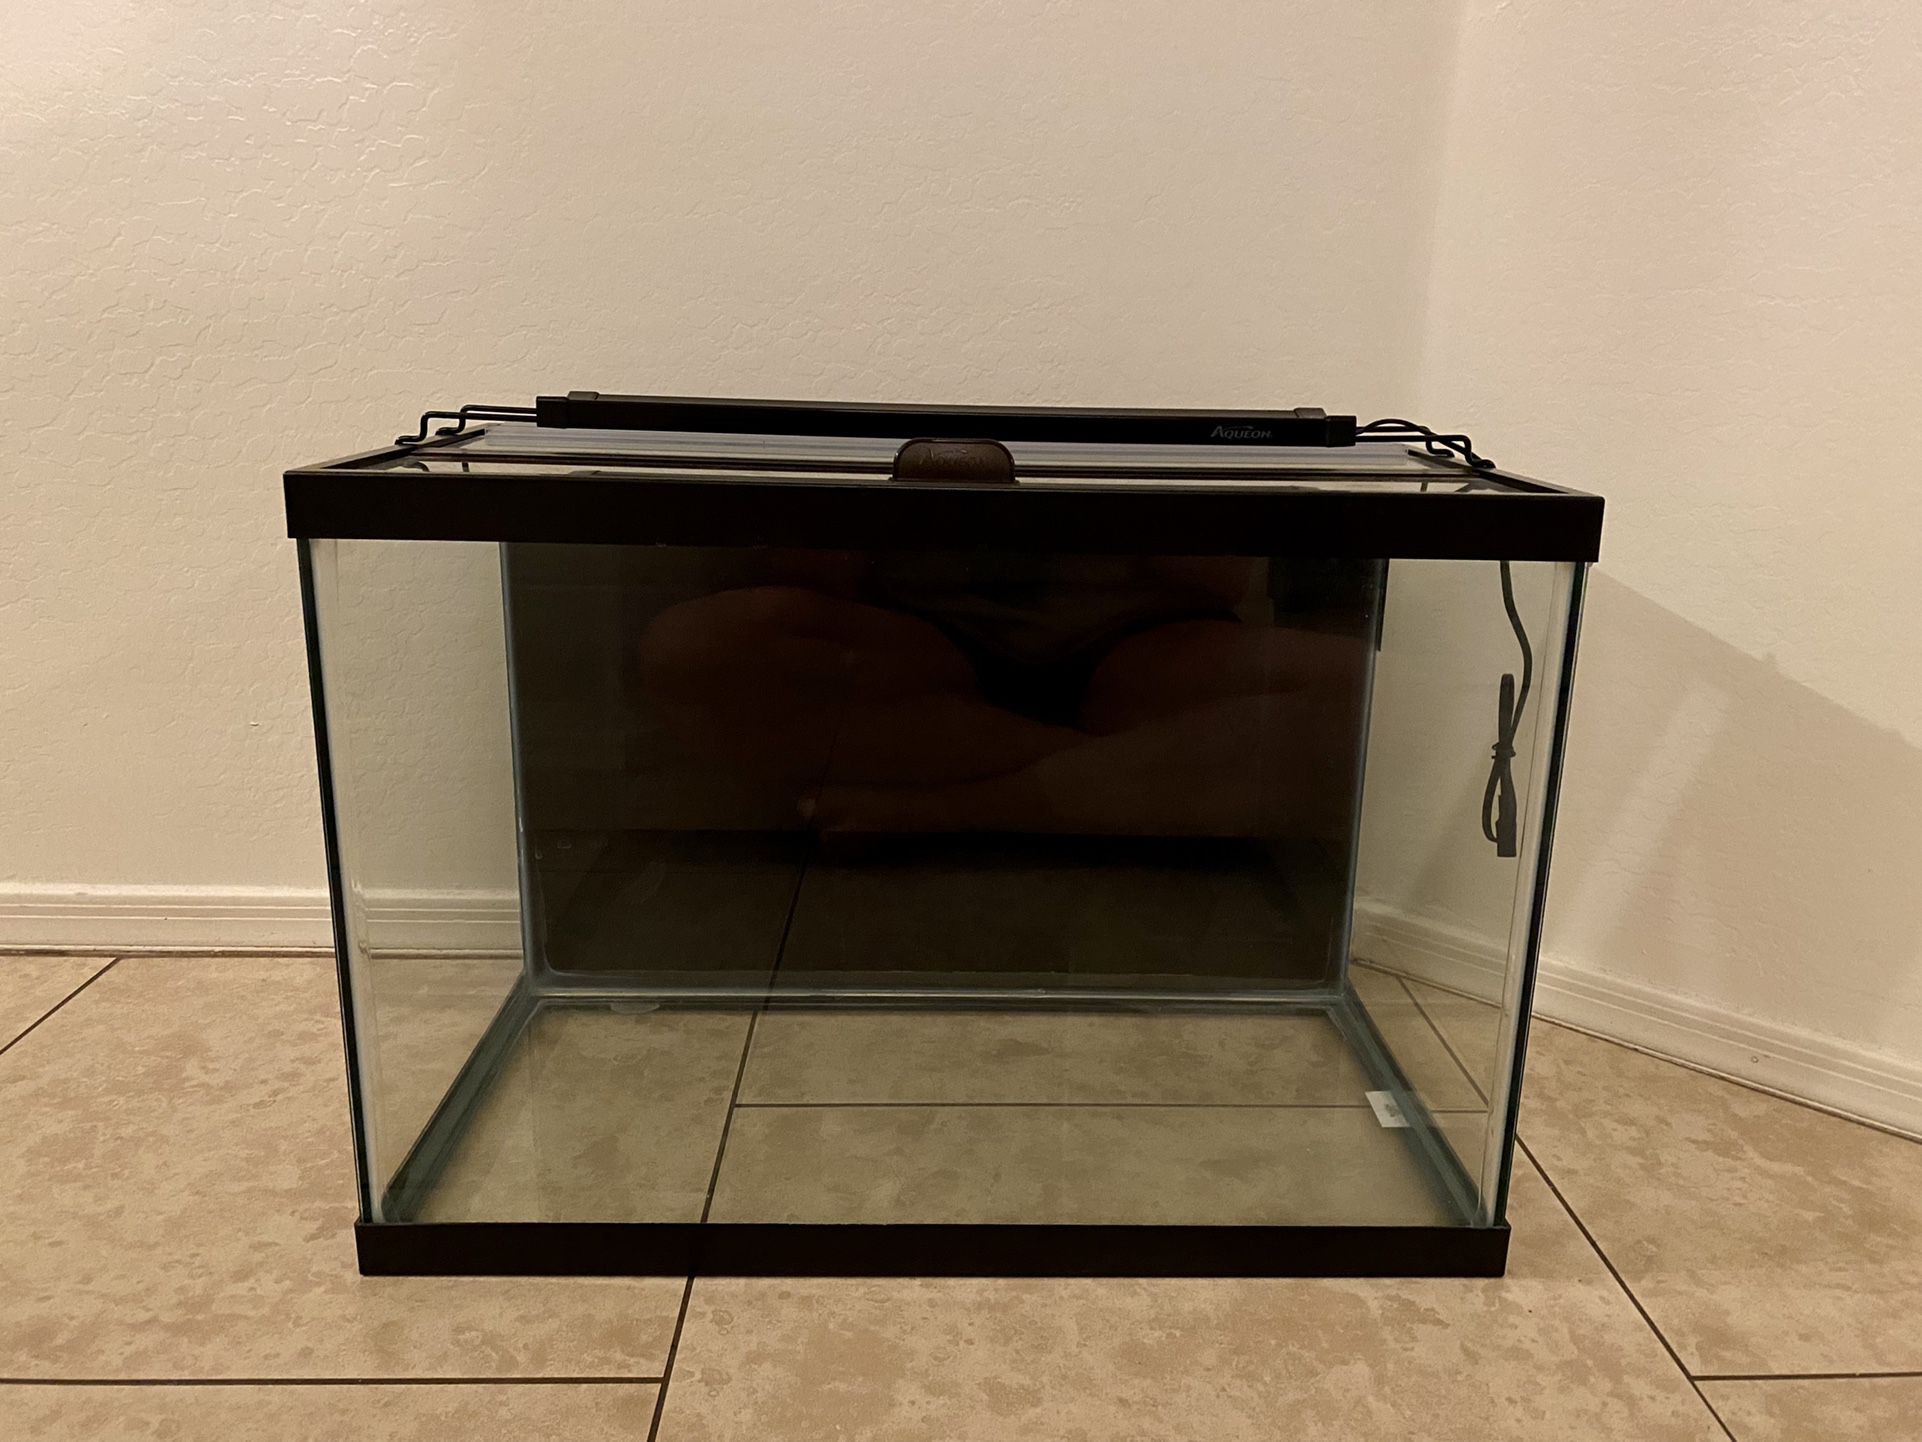 20 Gal Aqueon Fish Tank with LED Touch Light and Glass Canopy 